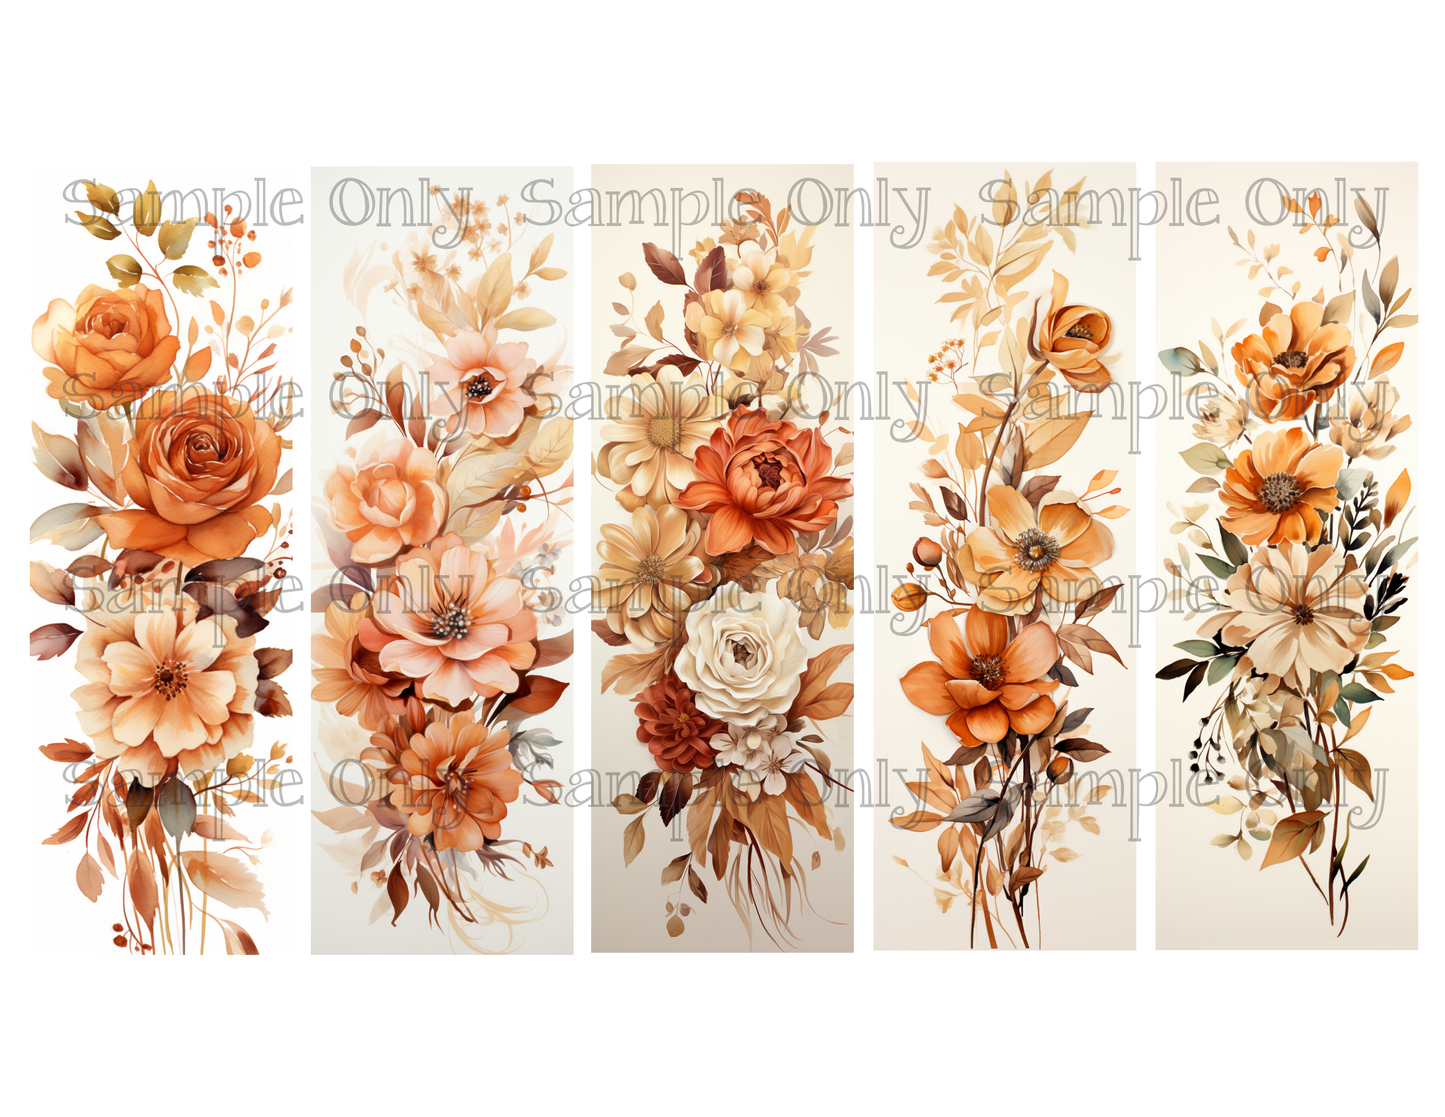 Autumn Flowers Bookmark Set 01 Printed Water Soluble Image Transfer Sheet For Polymer Clay